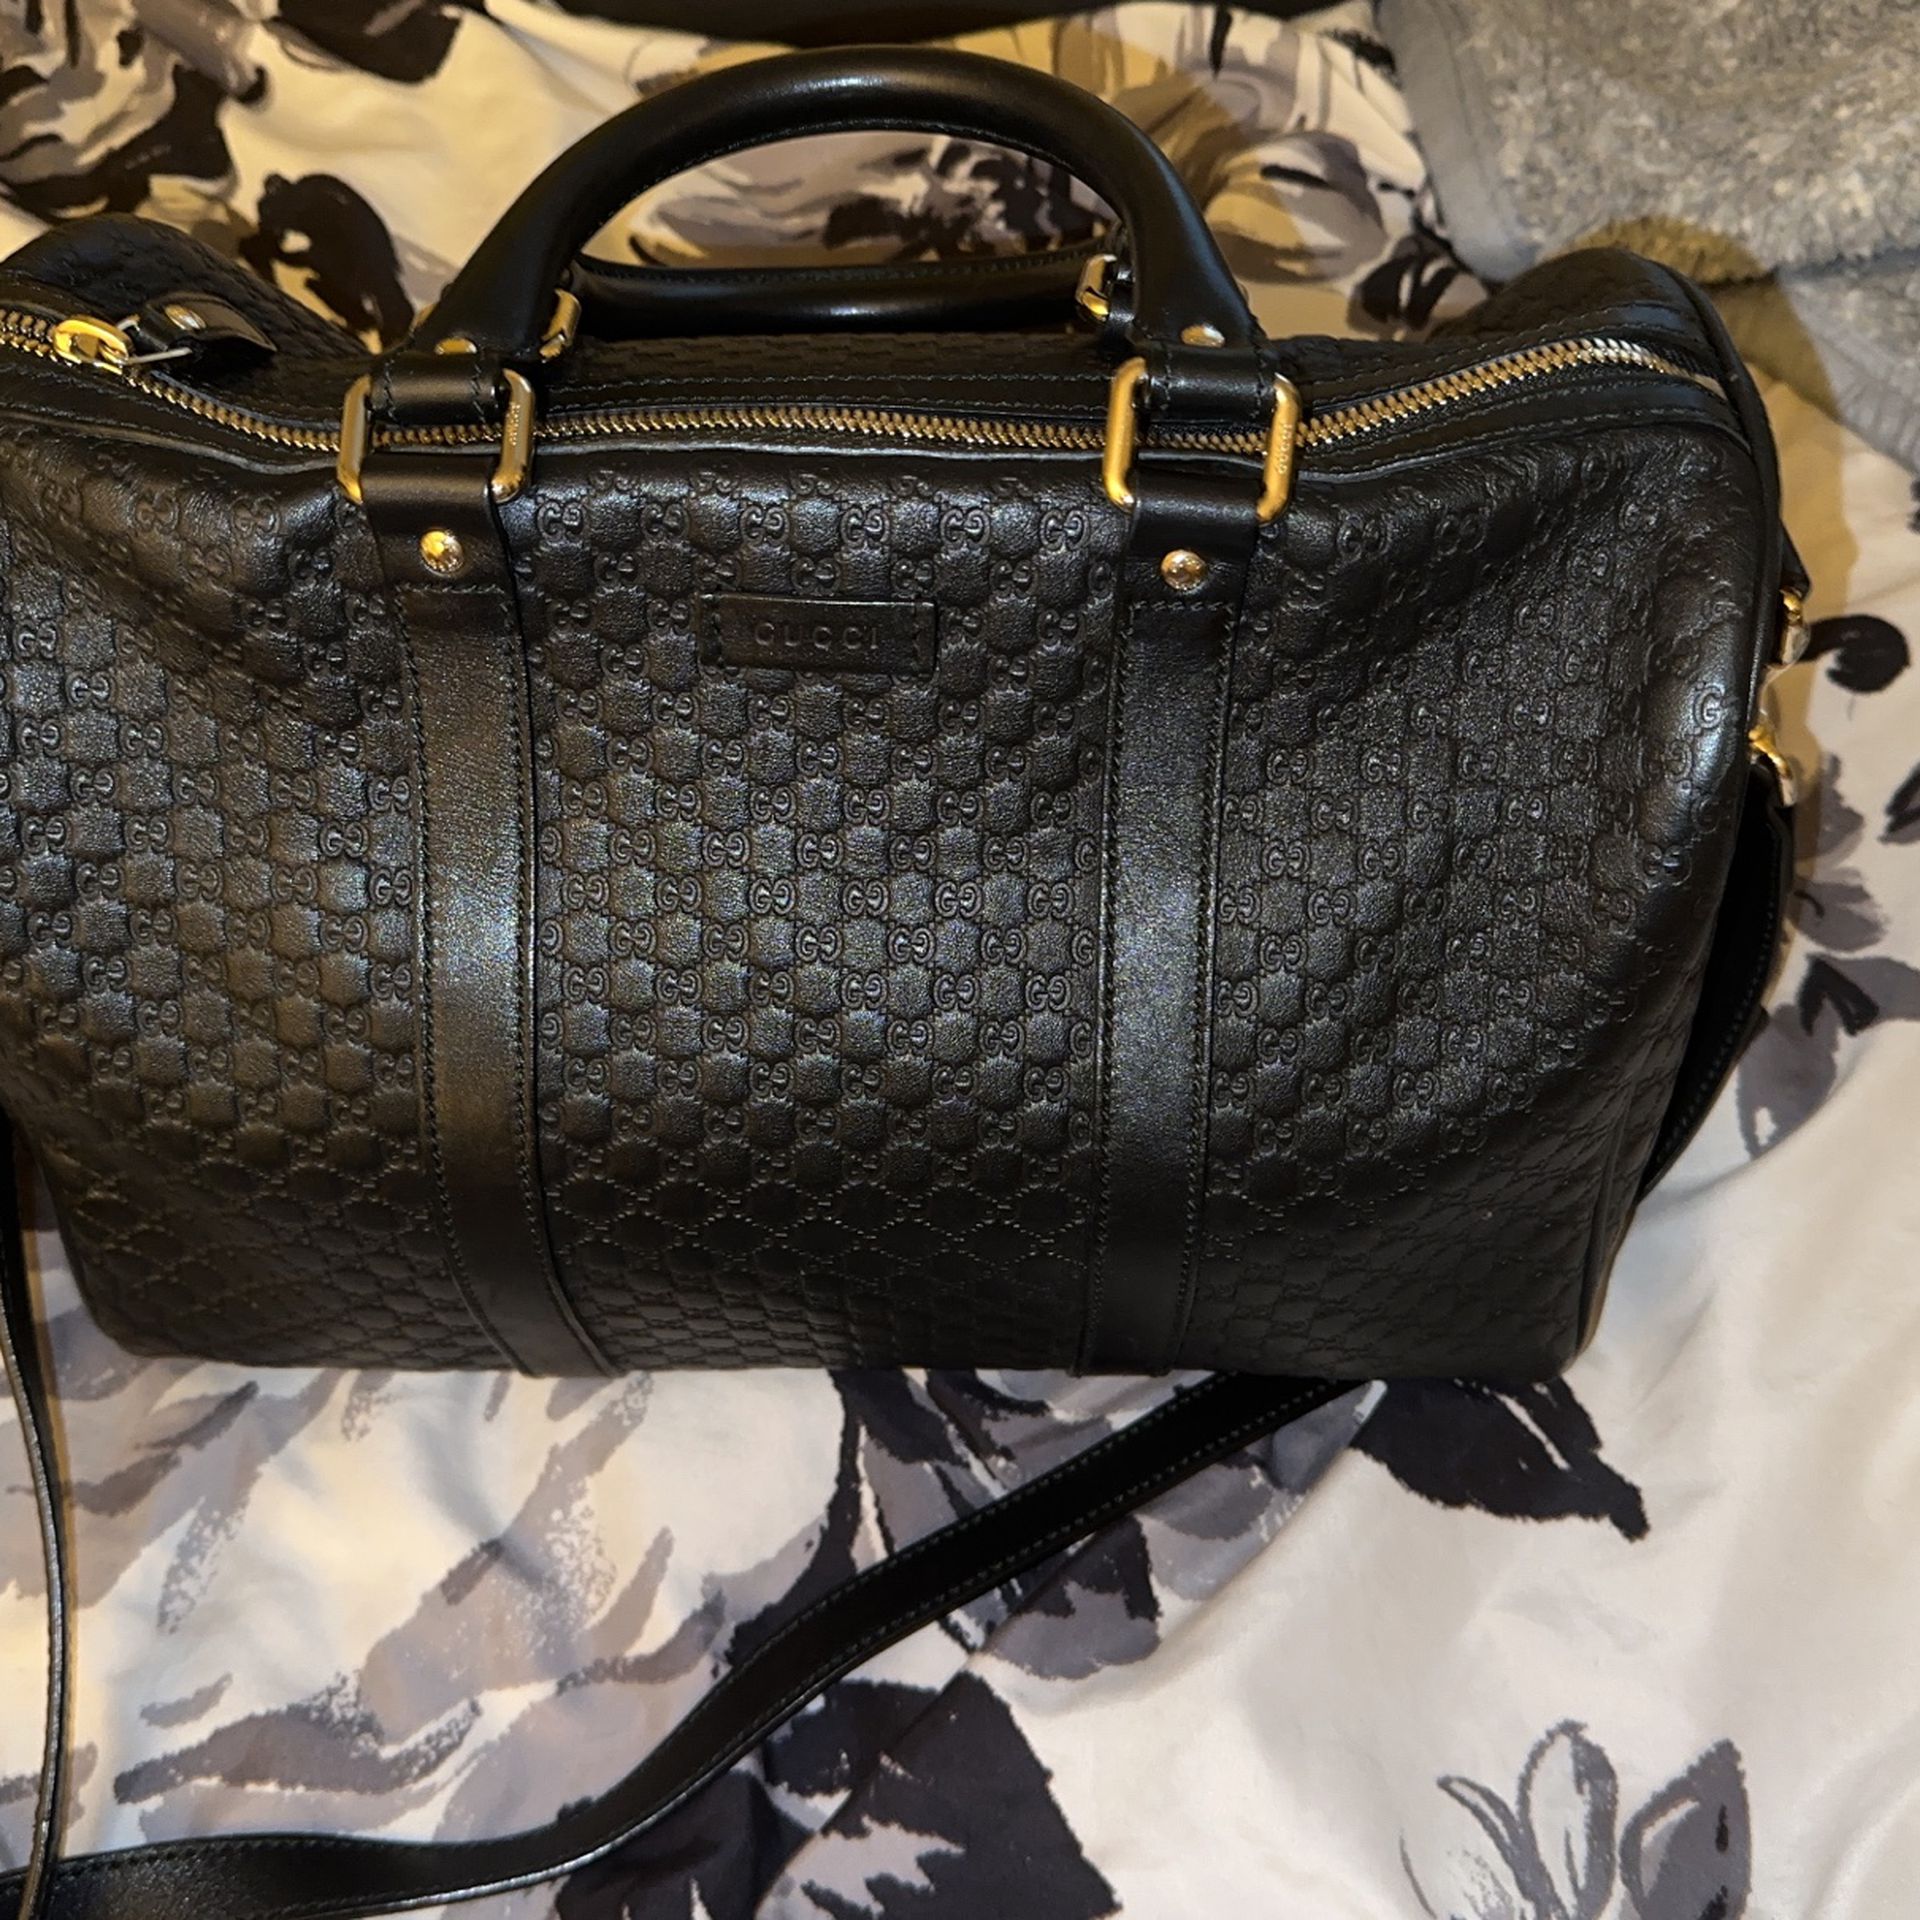 Gucci Boston Bag for Sale in San Diego, CA - OfferUp